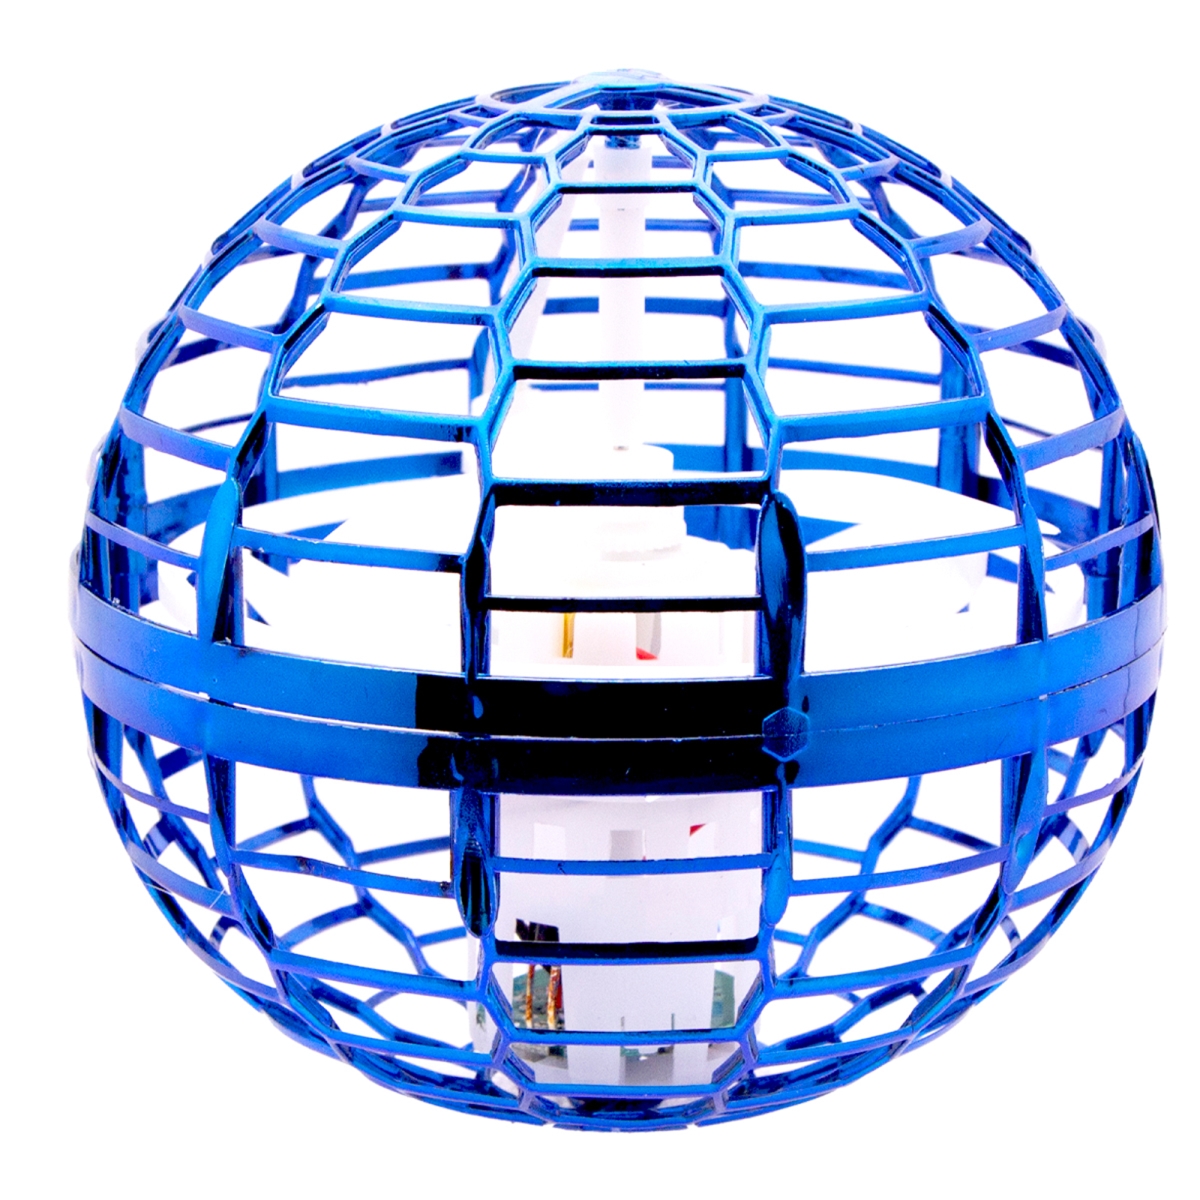 Picture of Zummy FS1161PK Hand Operated Flying LED Orb Ball Toy with Boomerang Effect for Indoors and Outdoors